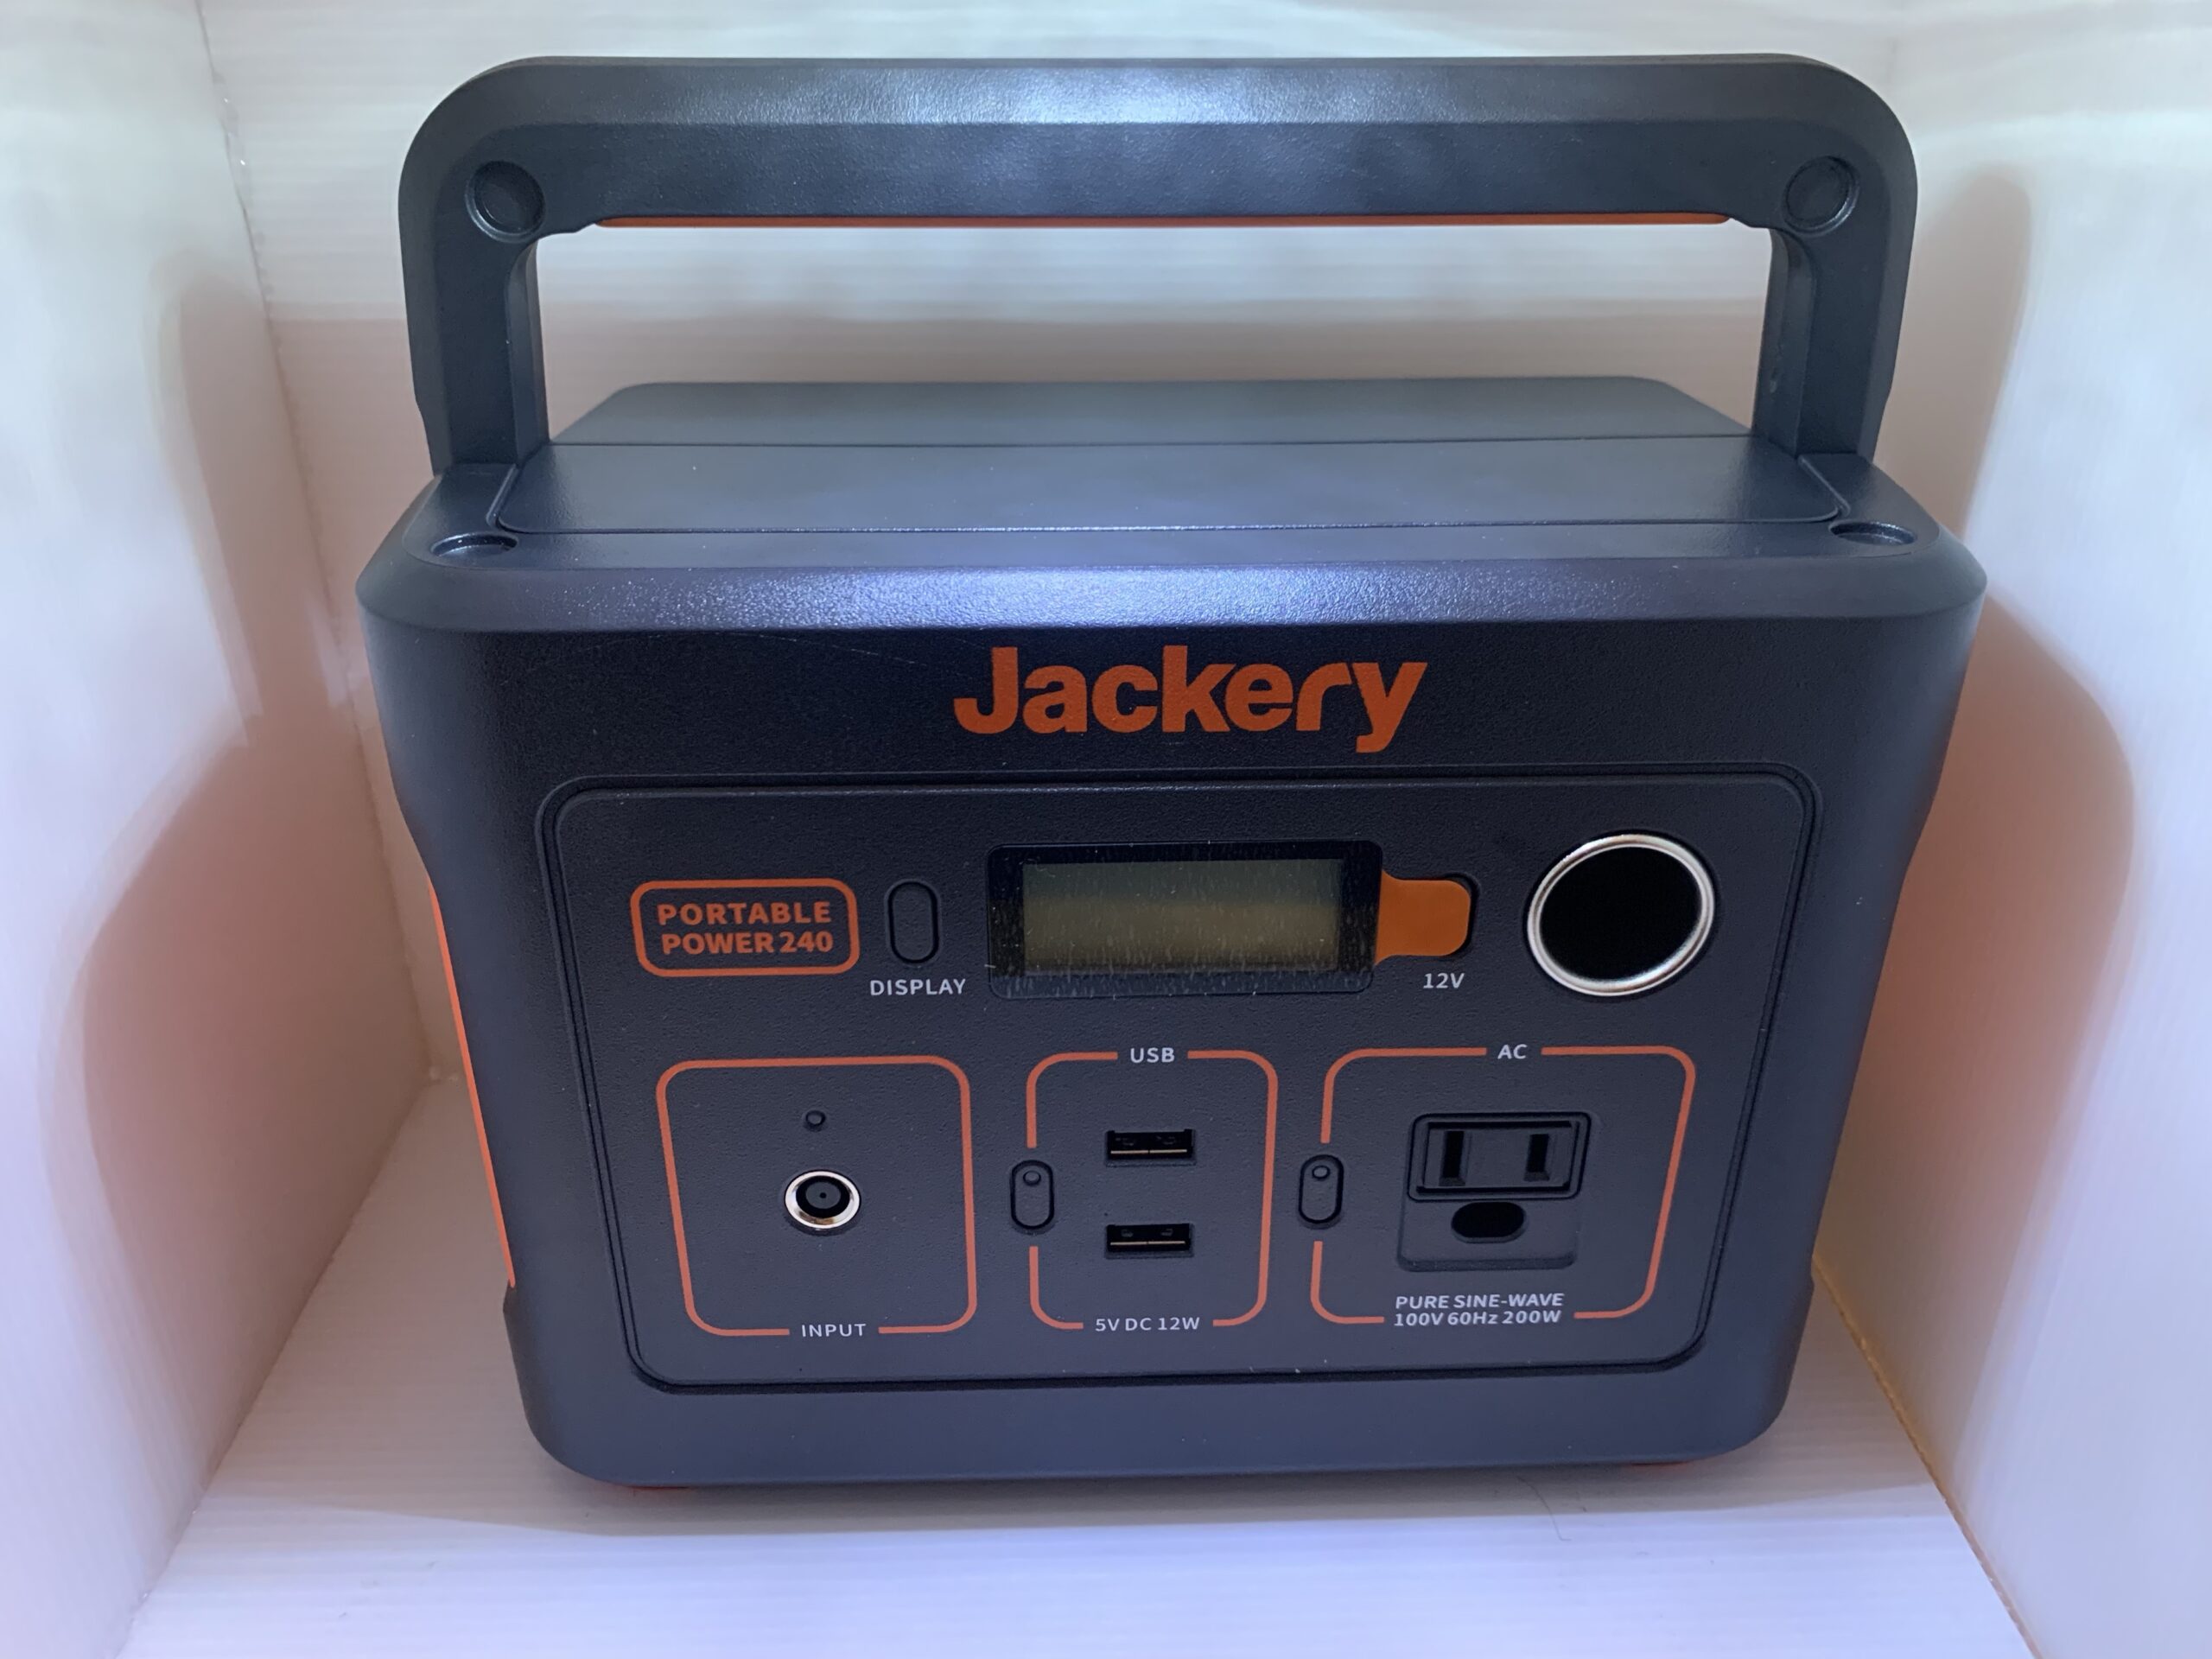 Jackry ポータブル電源240購入 – ほうぼうの「放冒」探索日記